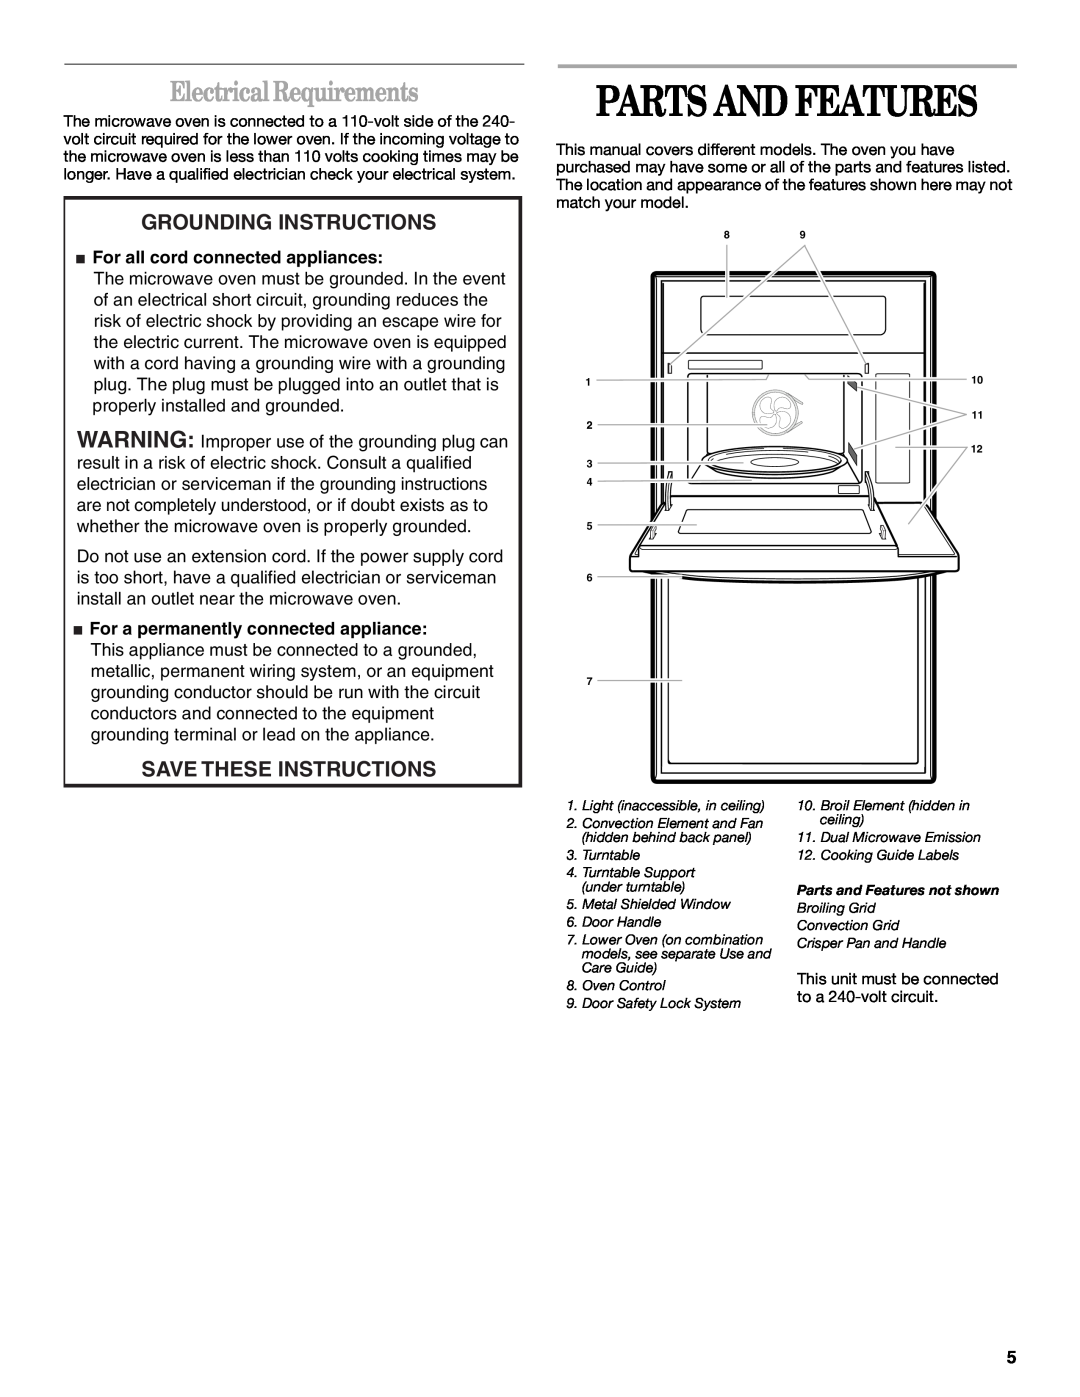 Whirlpool YGSC278, YGSC308 Parts And Features, Electrical Requirements, Grounding Instructions, Save These Instructions 